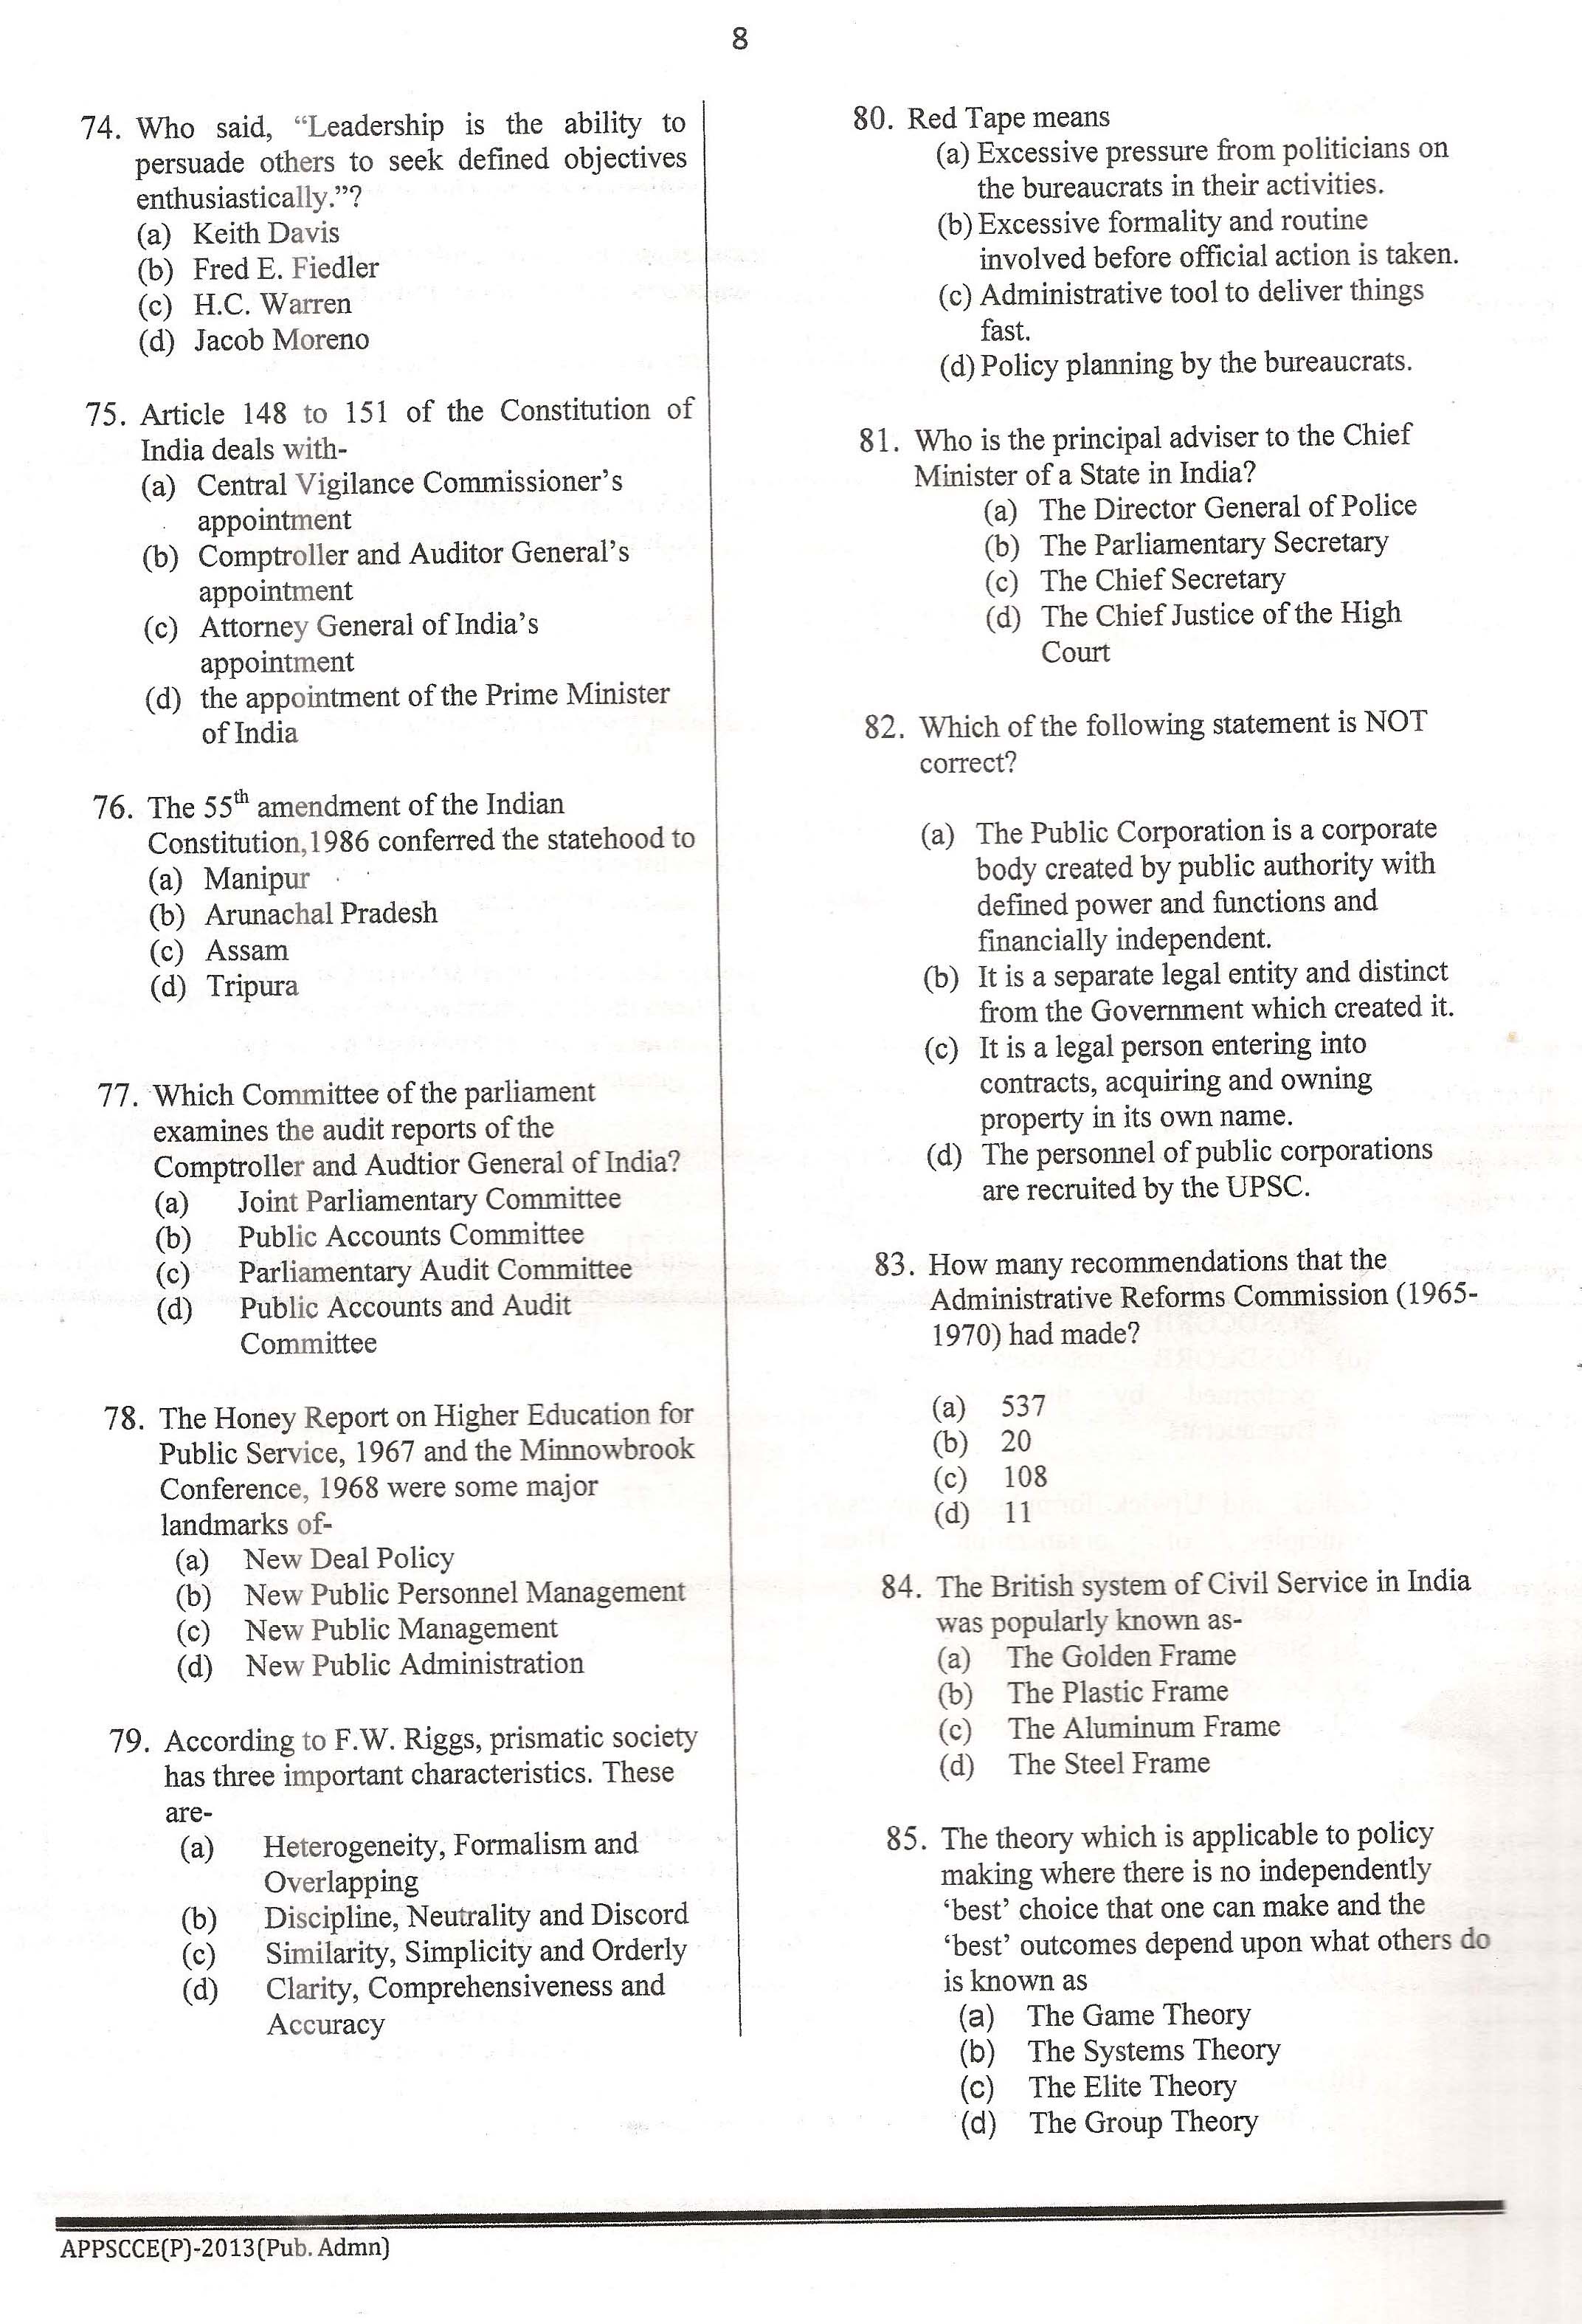 APPSC Combined Competitive Prelims Exam 2013 Public Administration 9